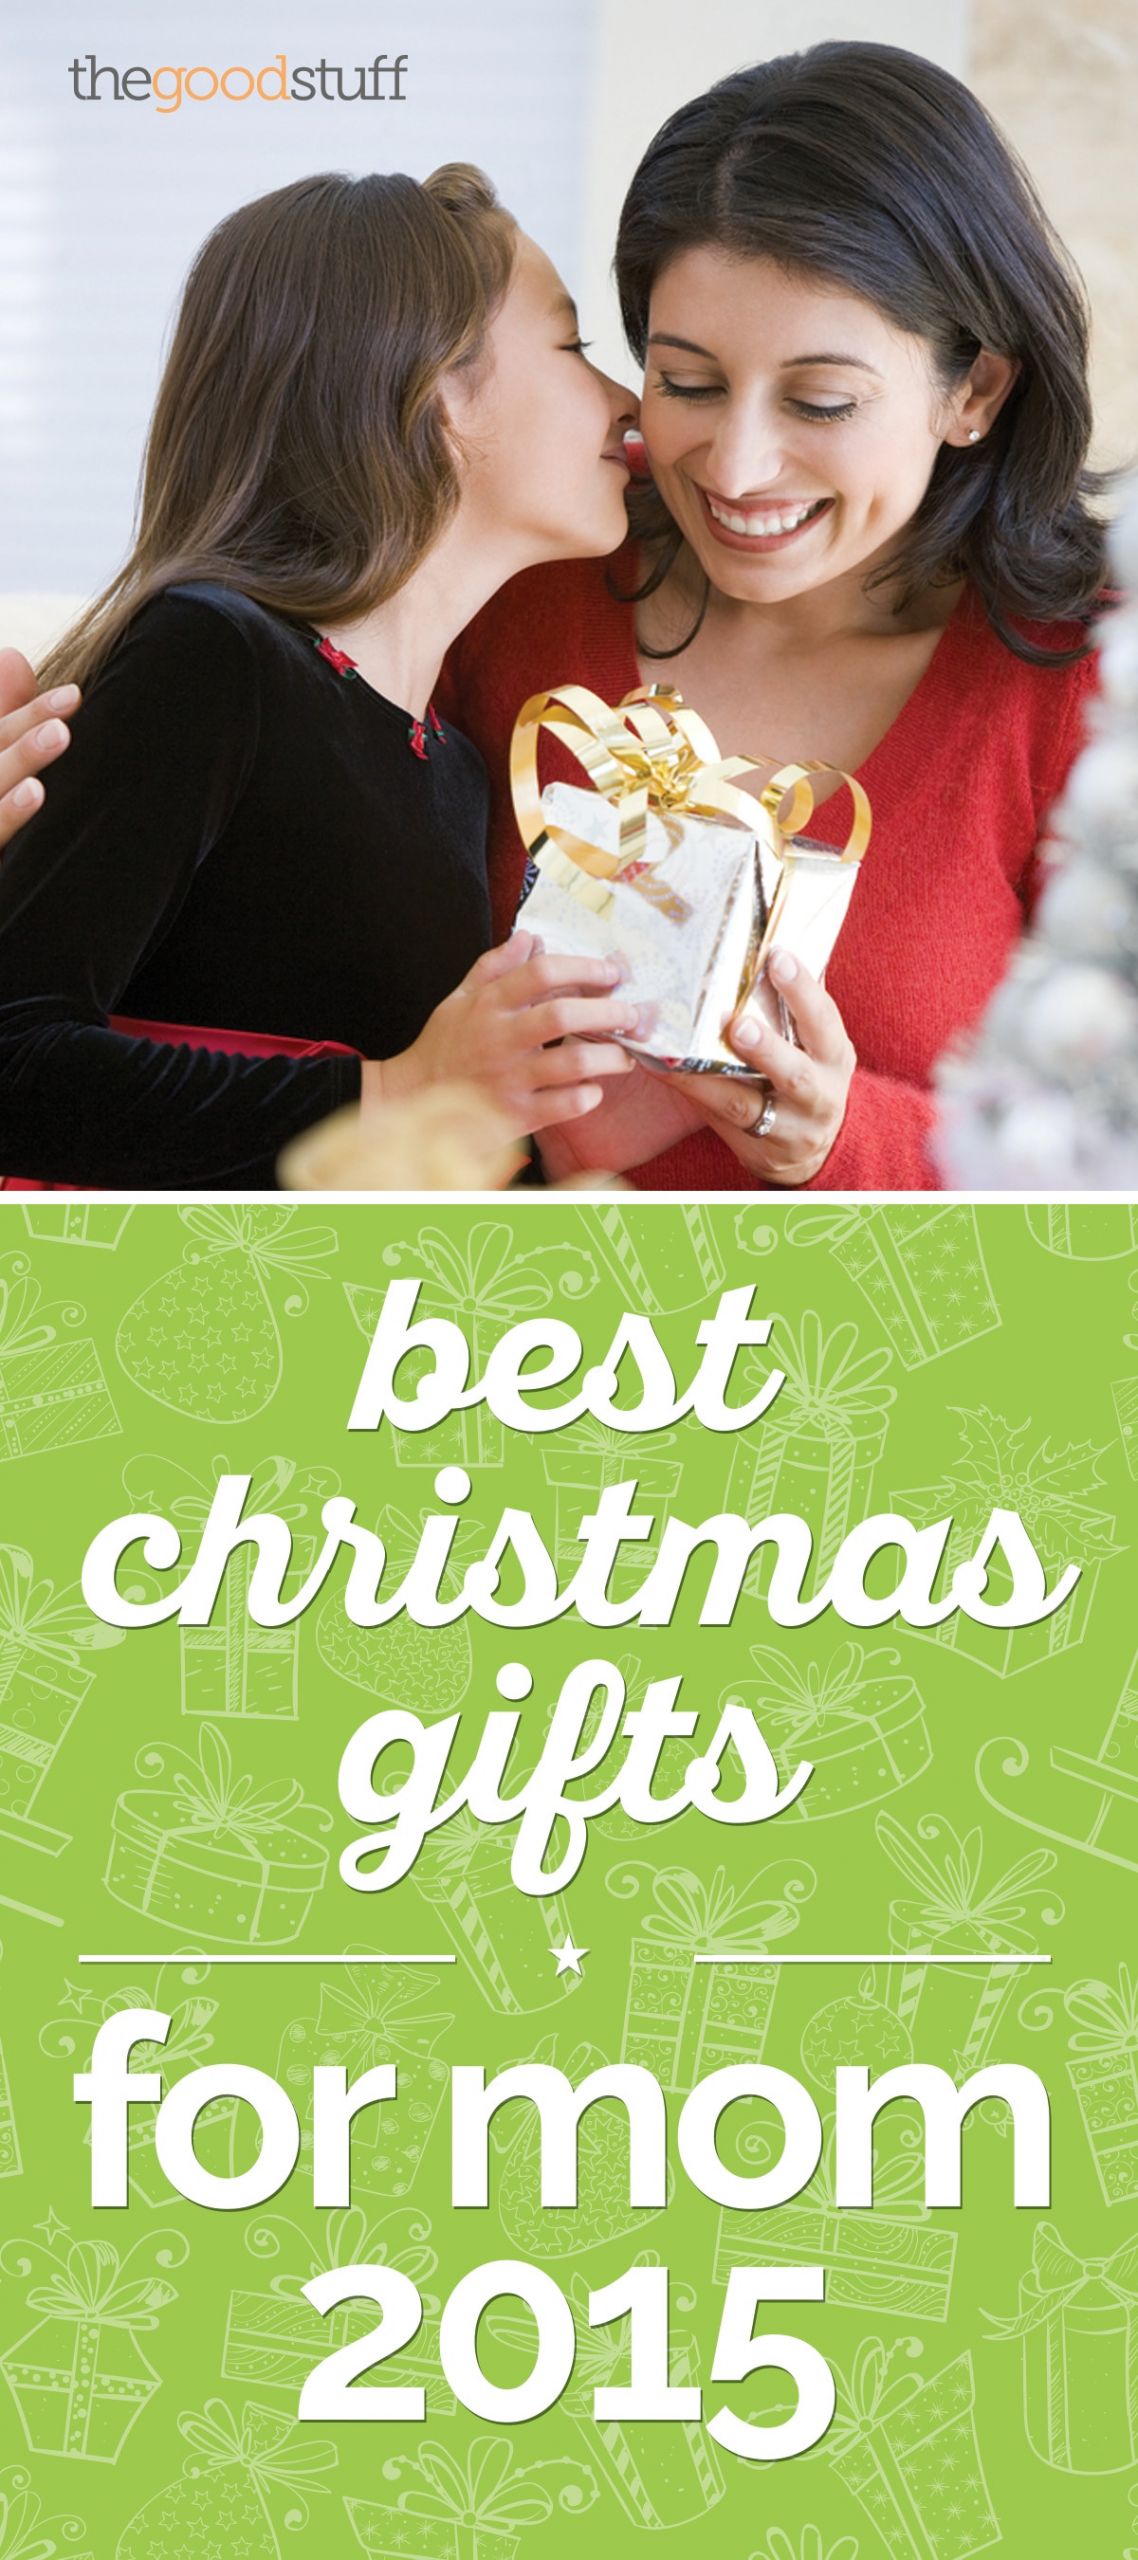 Great Christmas Gift Ideas For Moms
 7 Gifts Your Mom Wouldn t Think to Buy for Herself